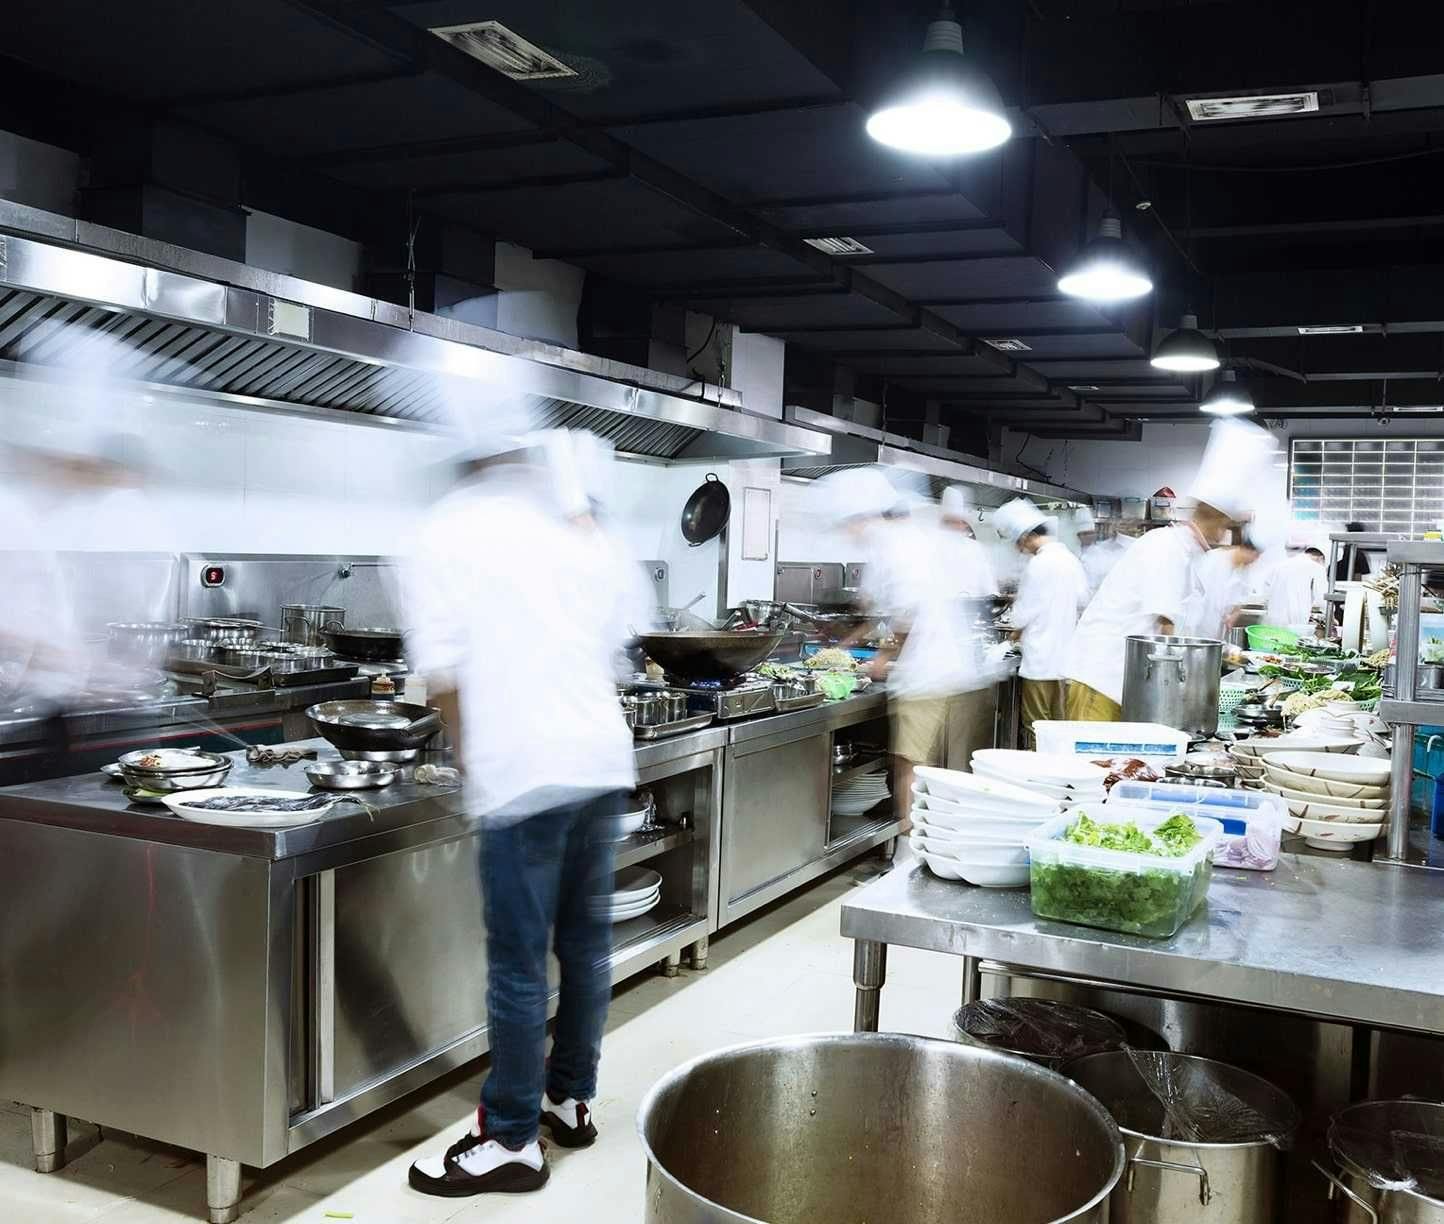 Kitchen staff standing in an industrial kitchen cooking food.